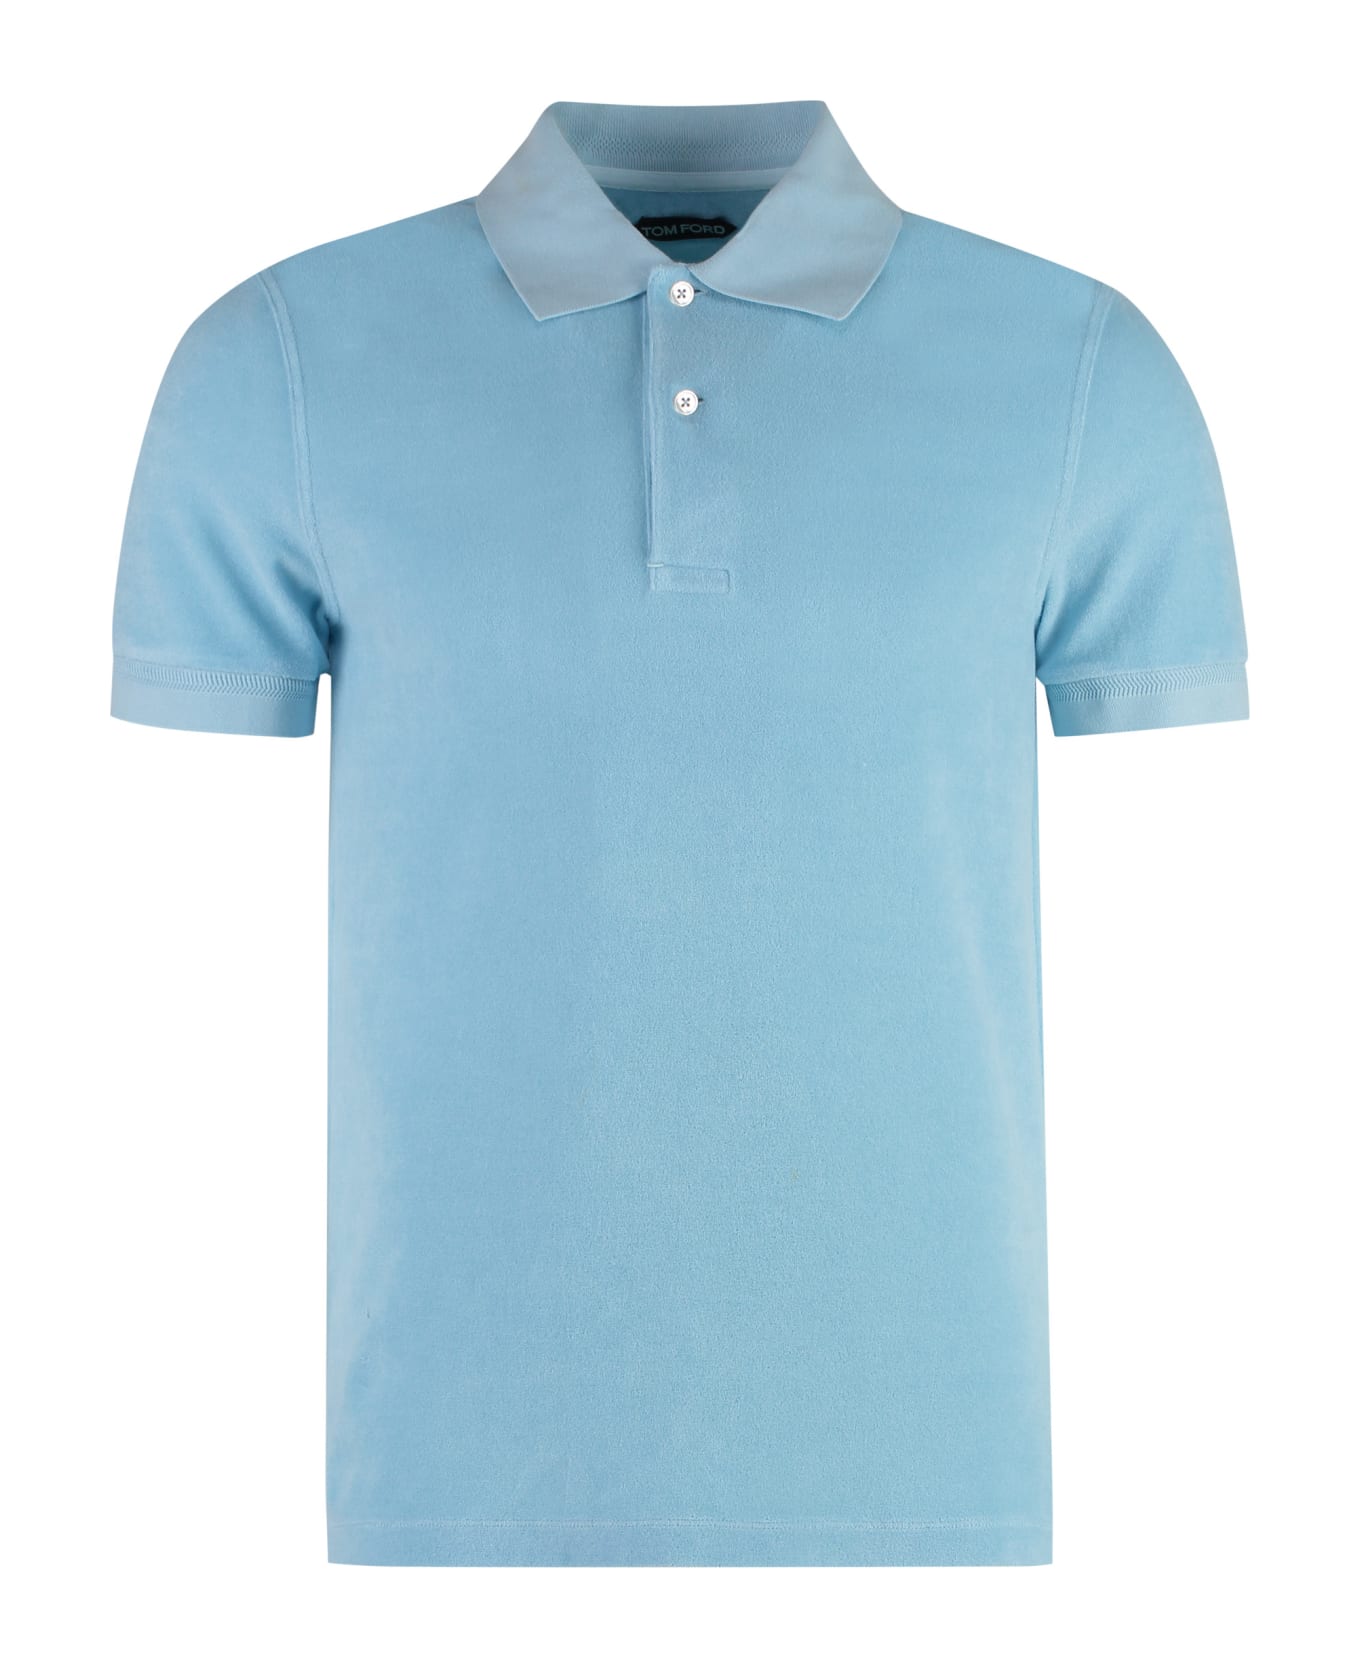 Tom Ford Short Sleeve Cotton Polo Shirt - turquoise